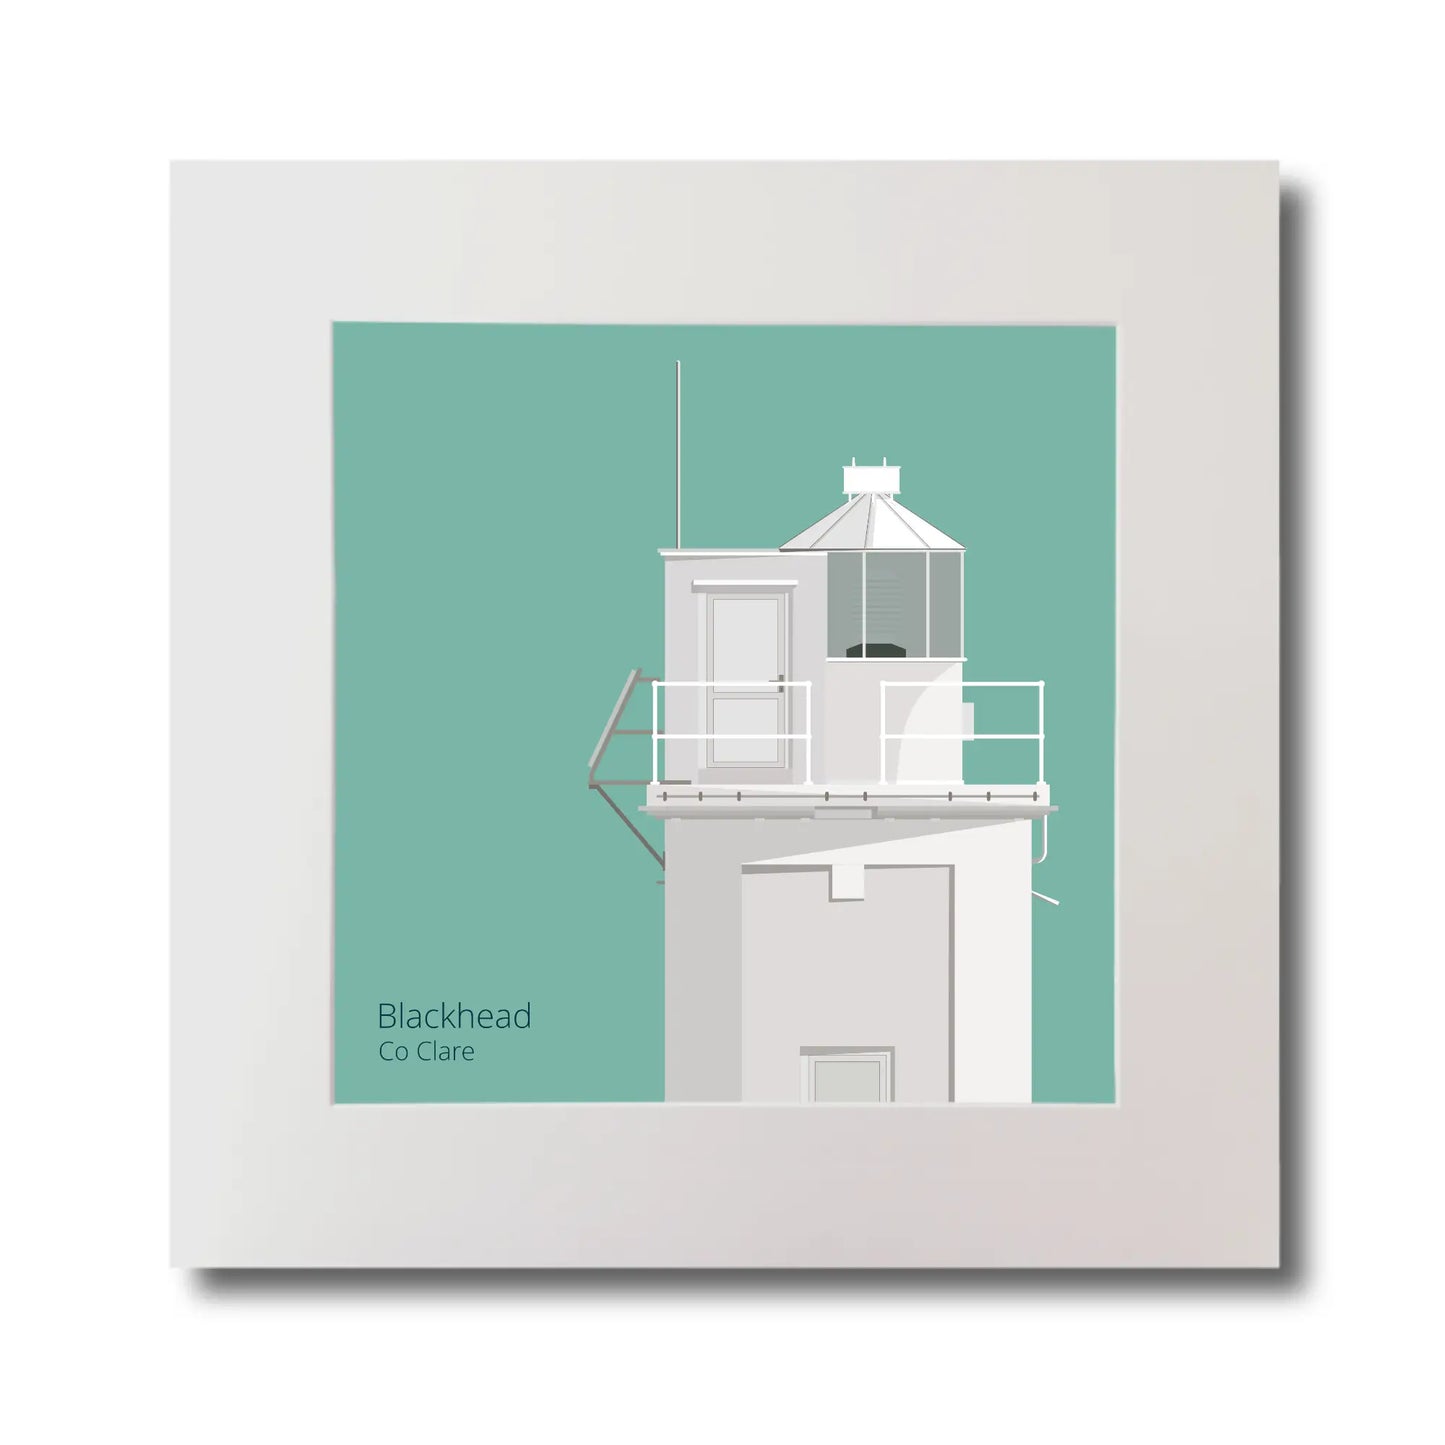 Illustration of Blackhead lighthouse on an ocean green background, mounted and measuring 30x30cm.